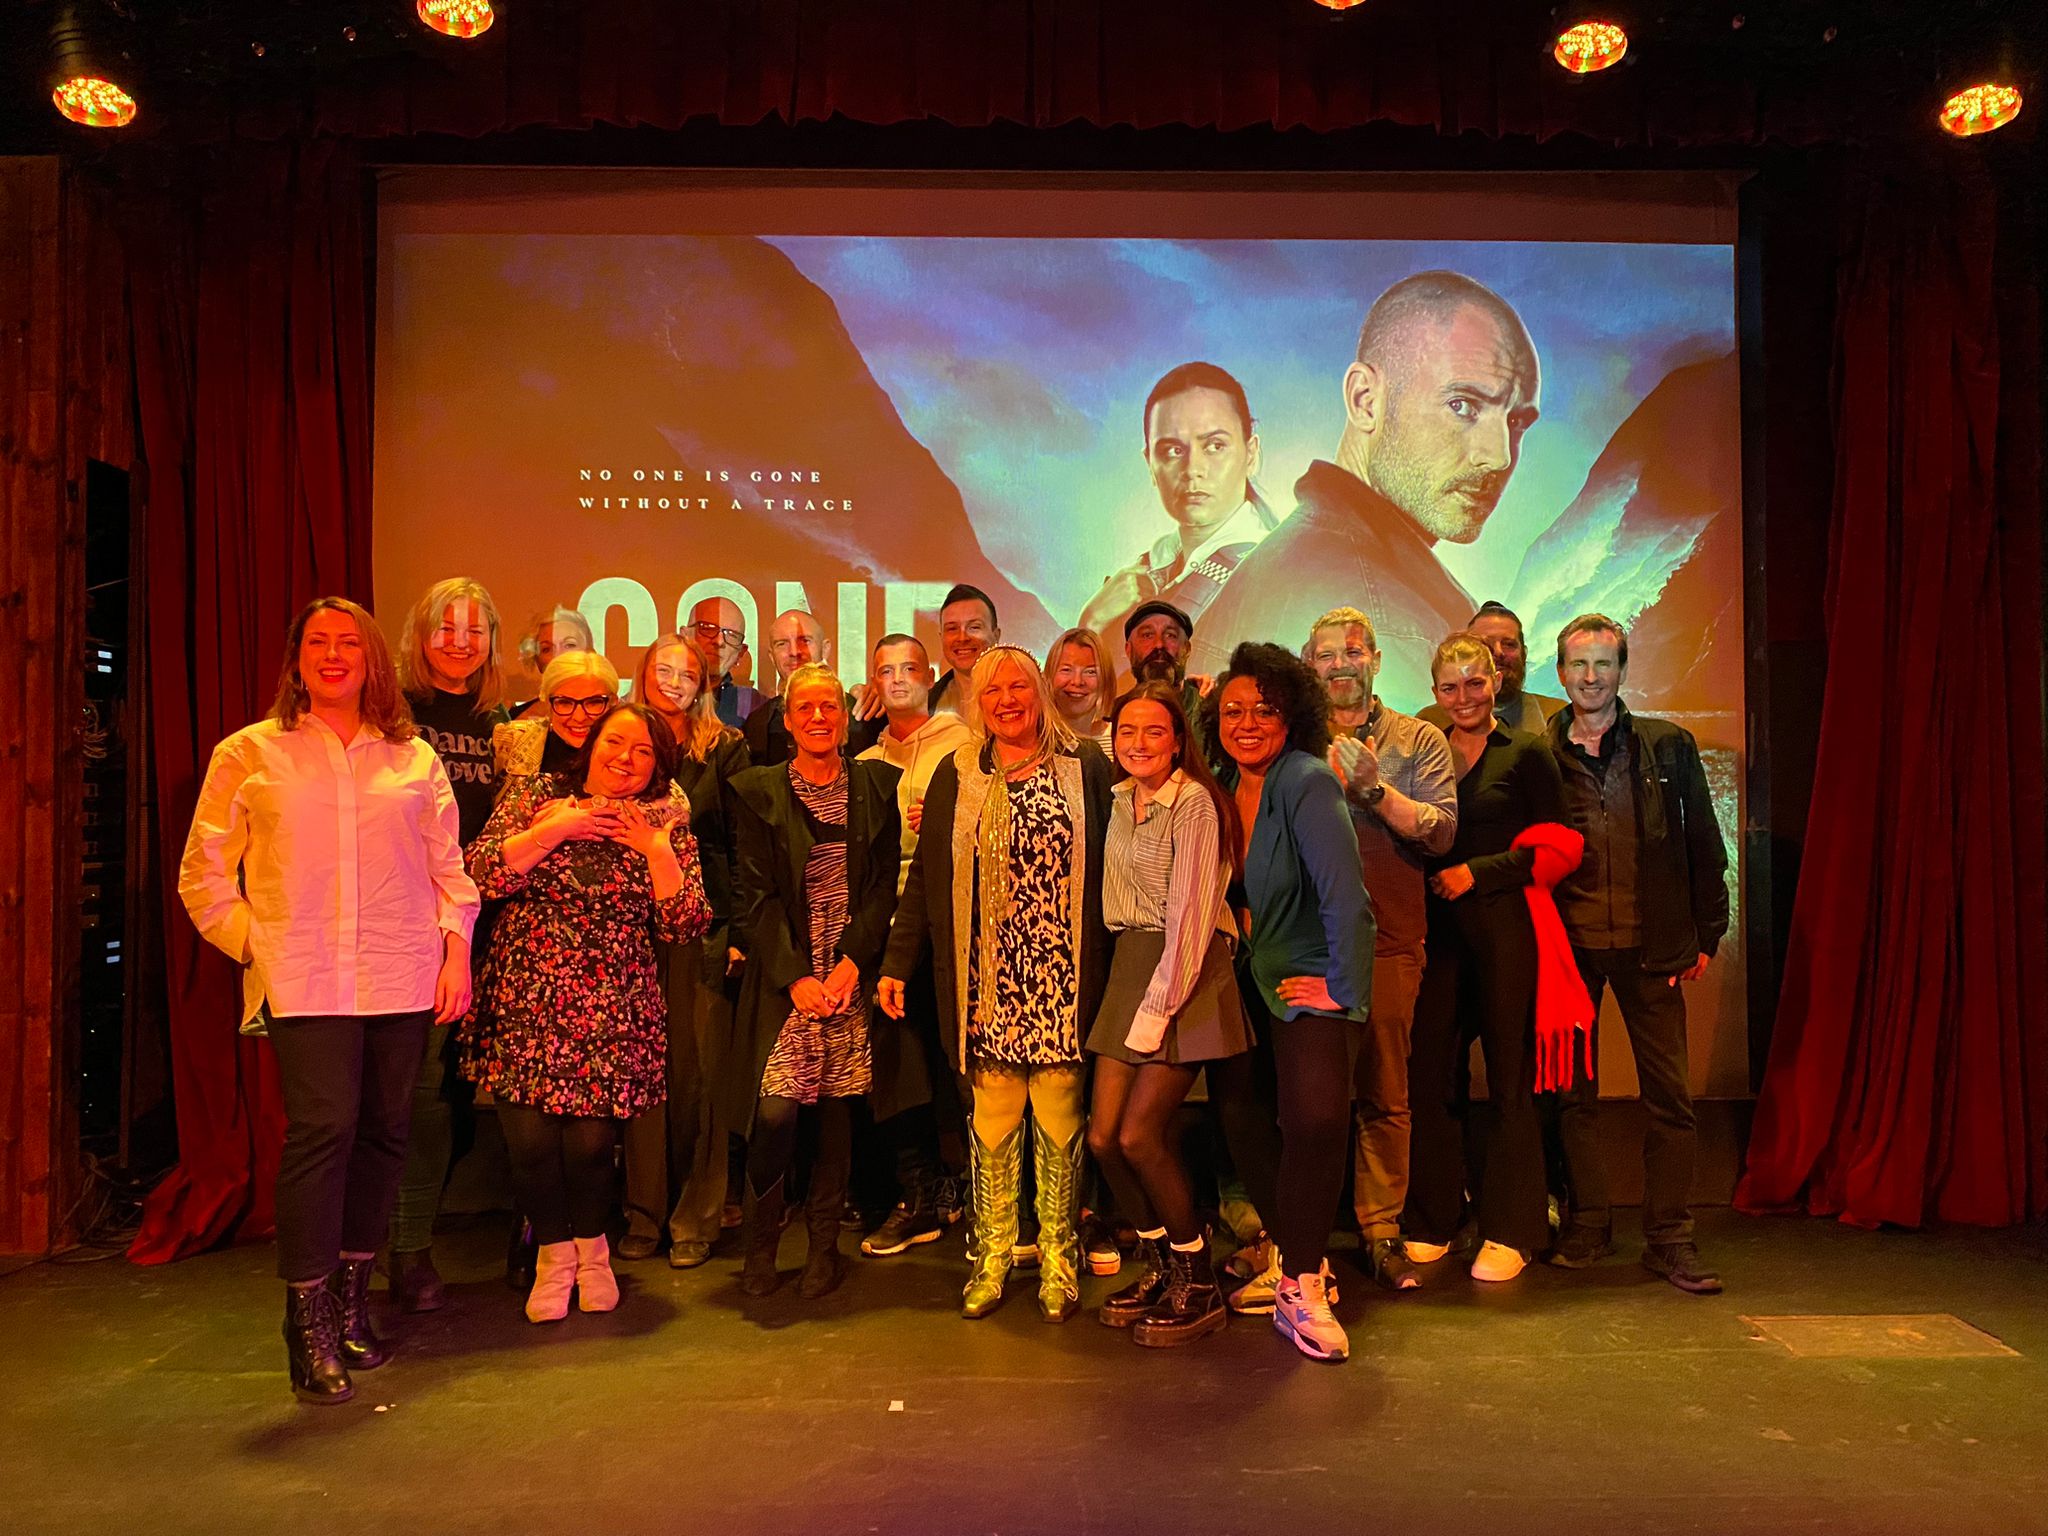 THE GONE Cast and Crew Screening – Main movie still